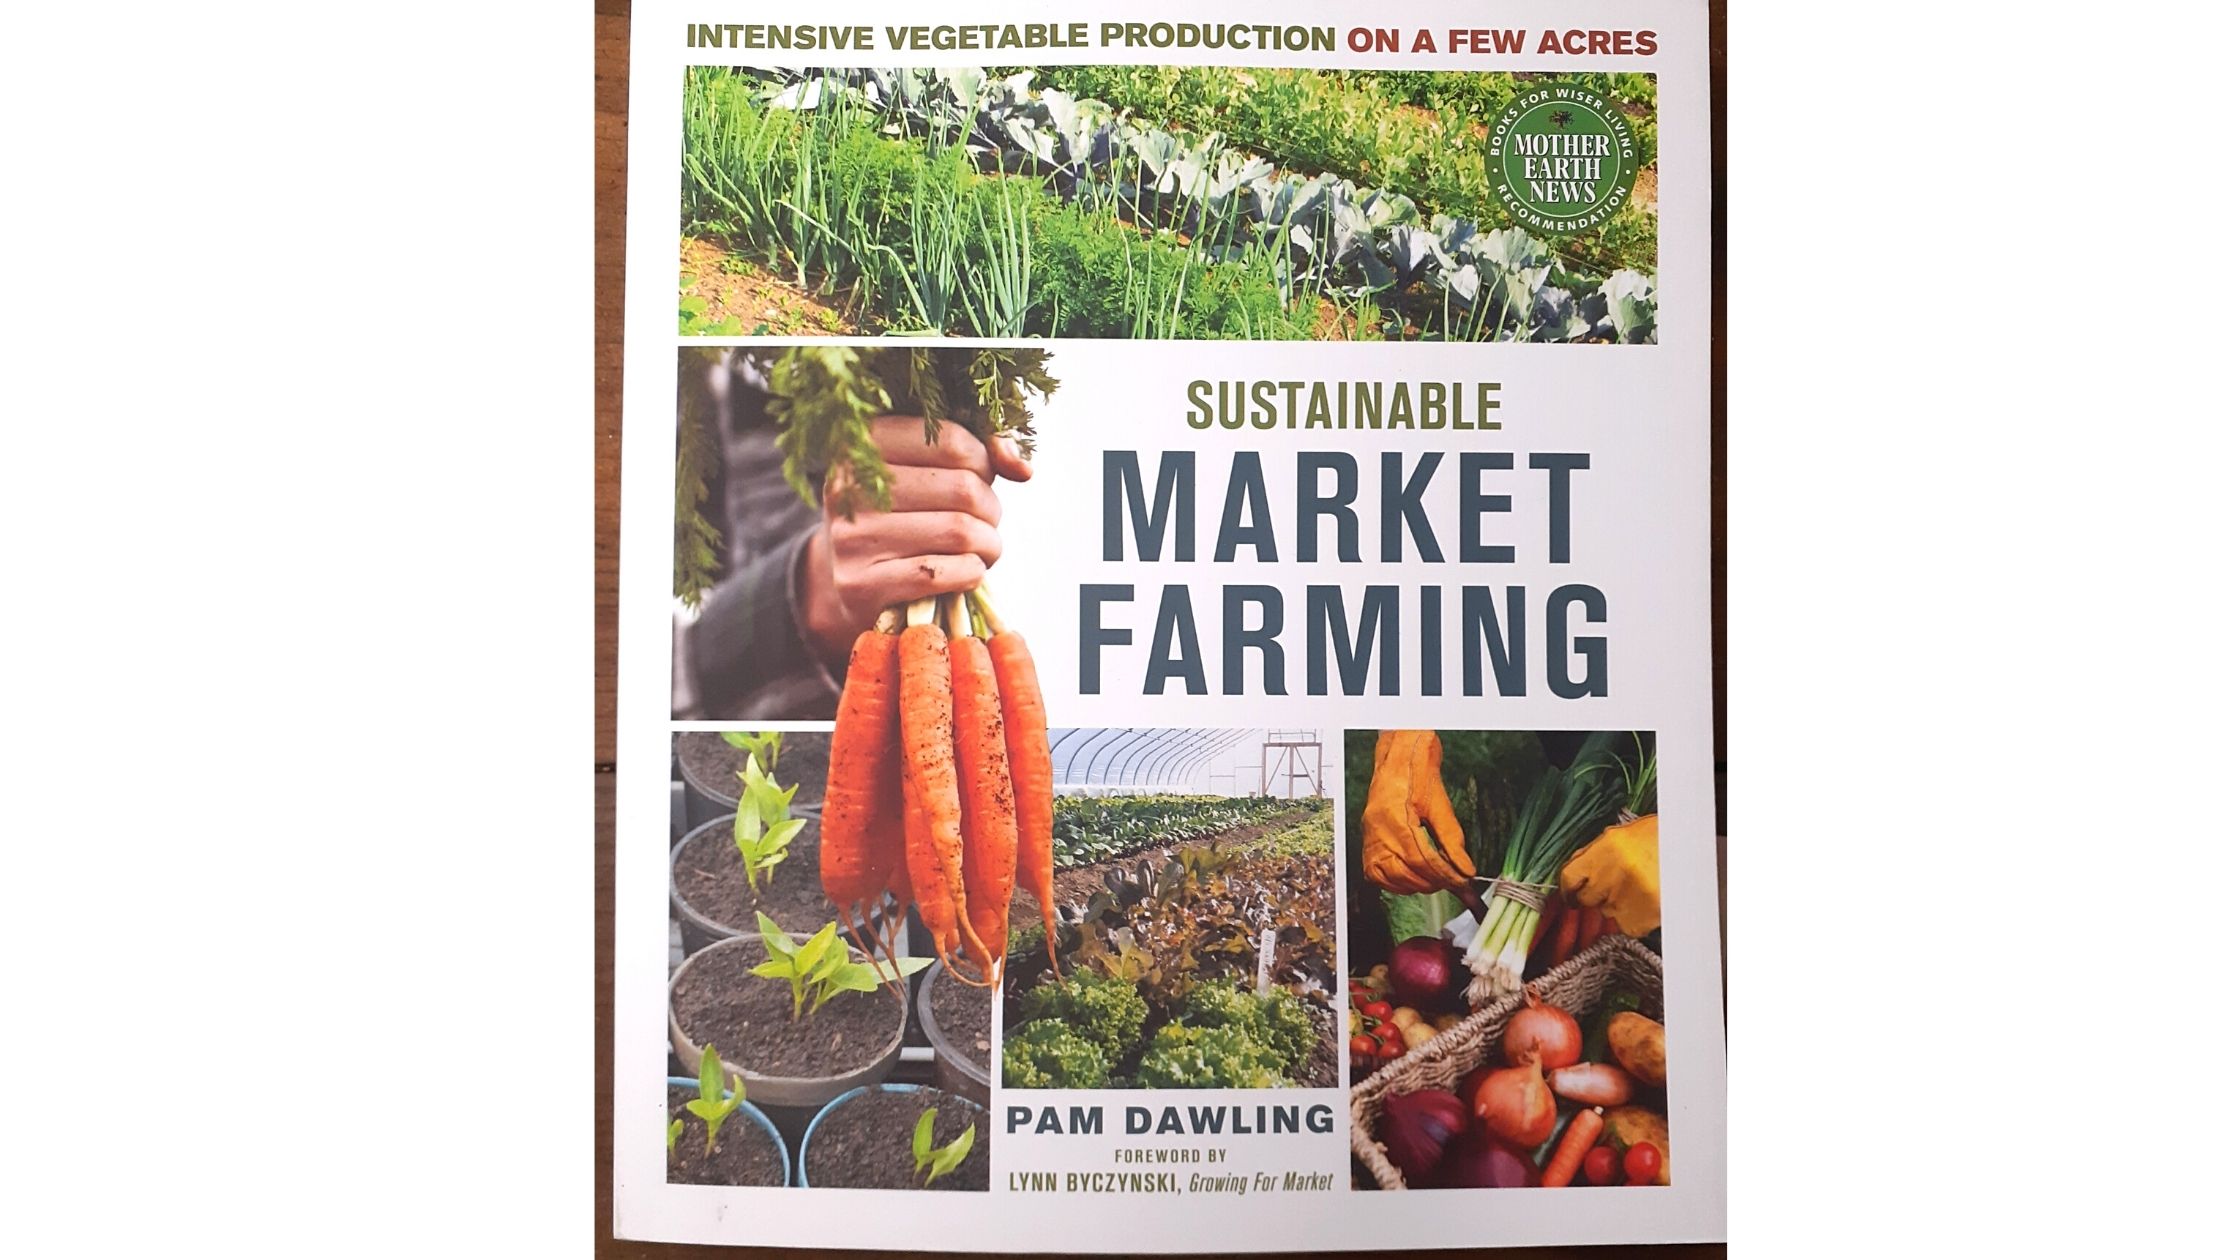 A Newbie’s Review: Sustainable Market Farming